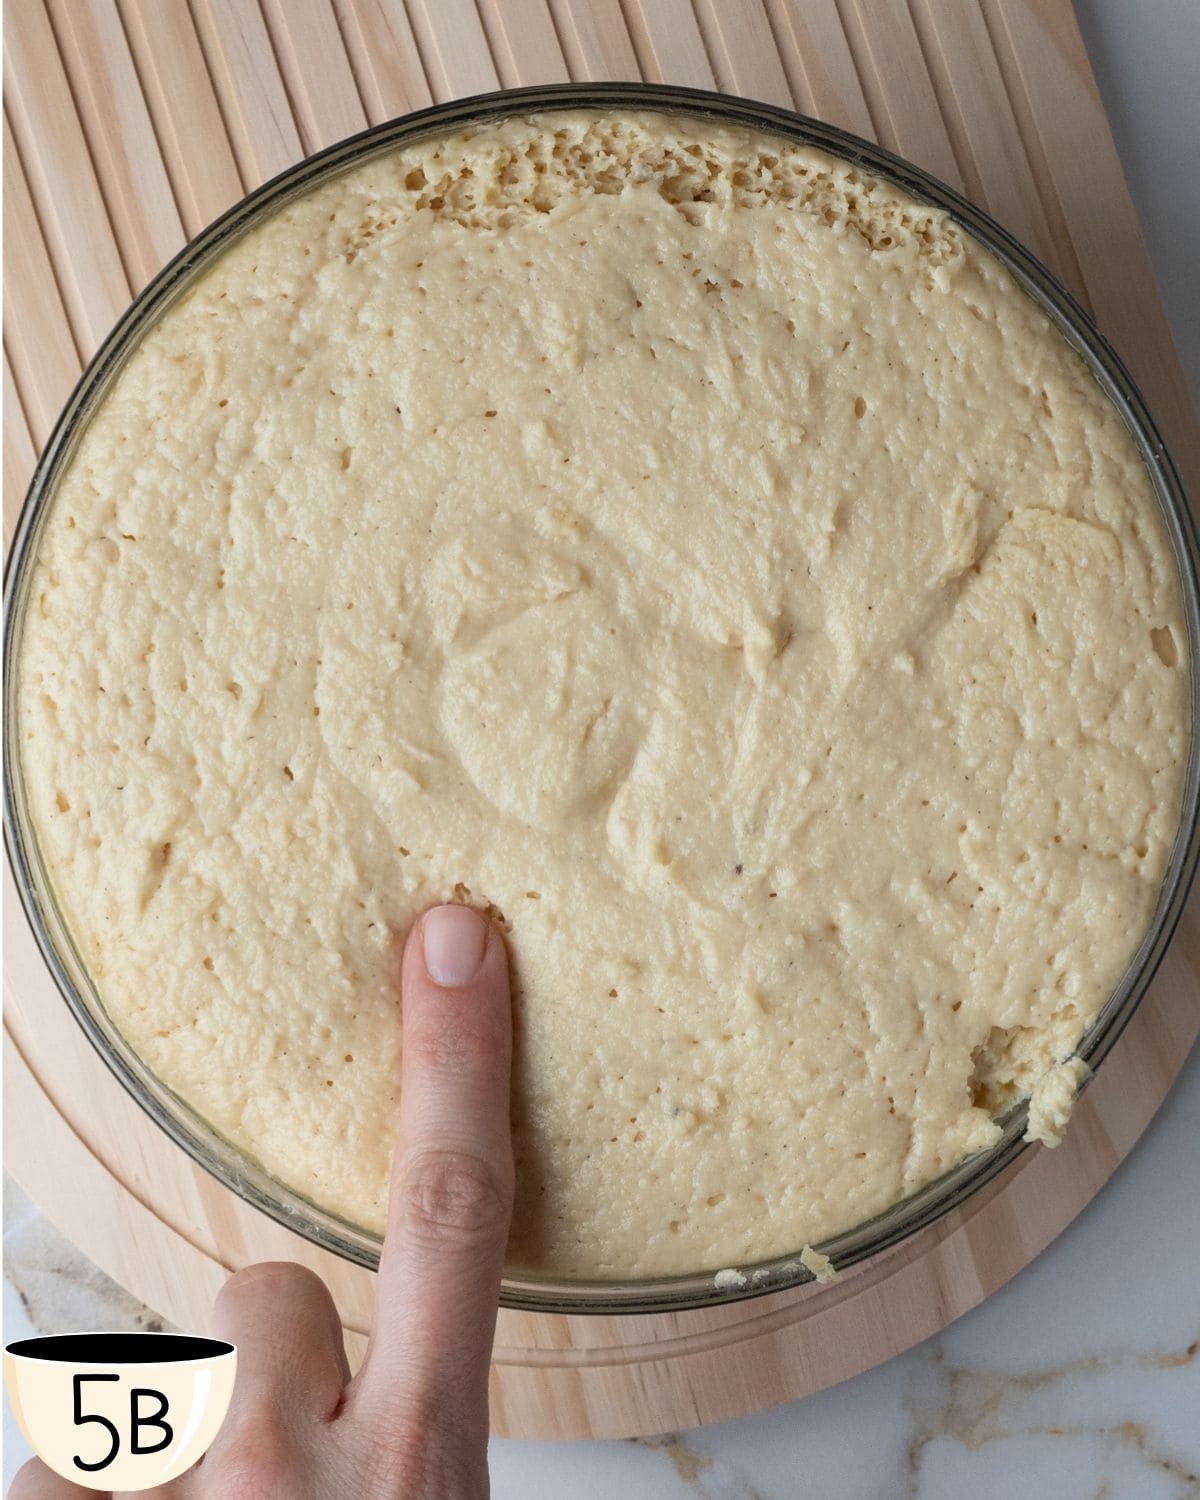 A person's finger presses into the dough to test its rise, an essential step in ensuring proper fermentation for gluten-free bagels.